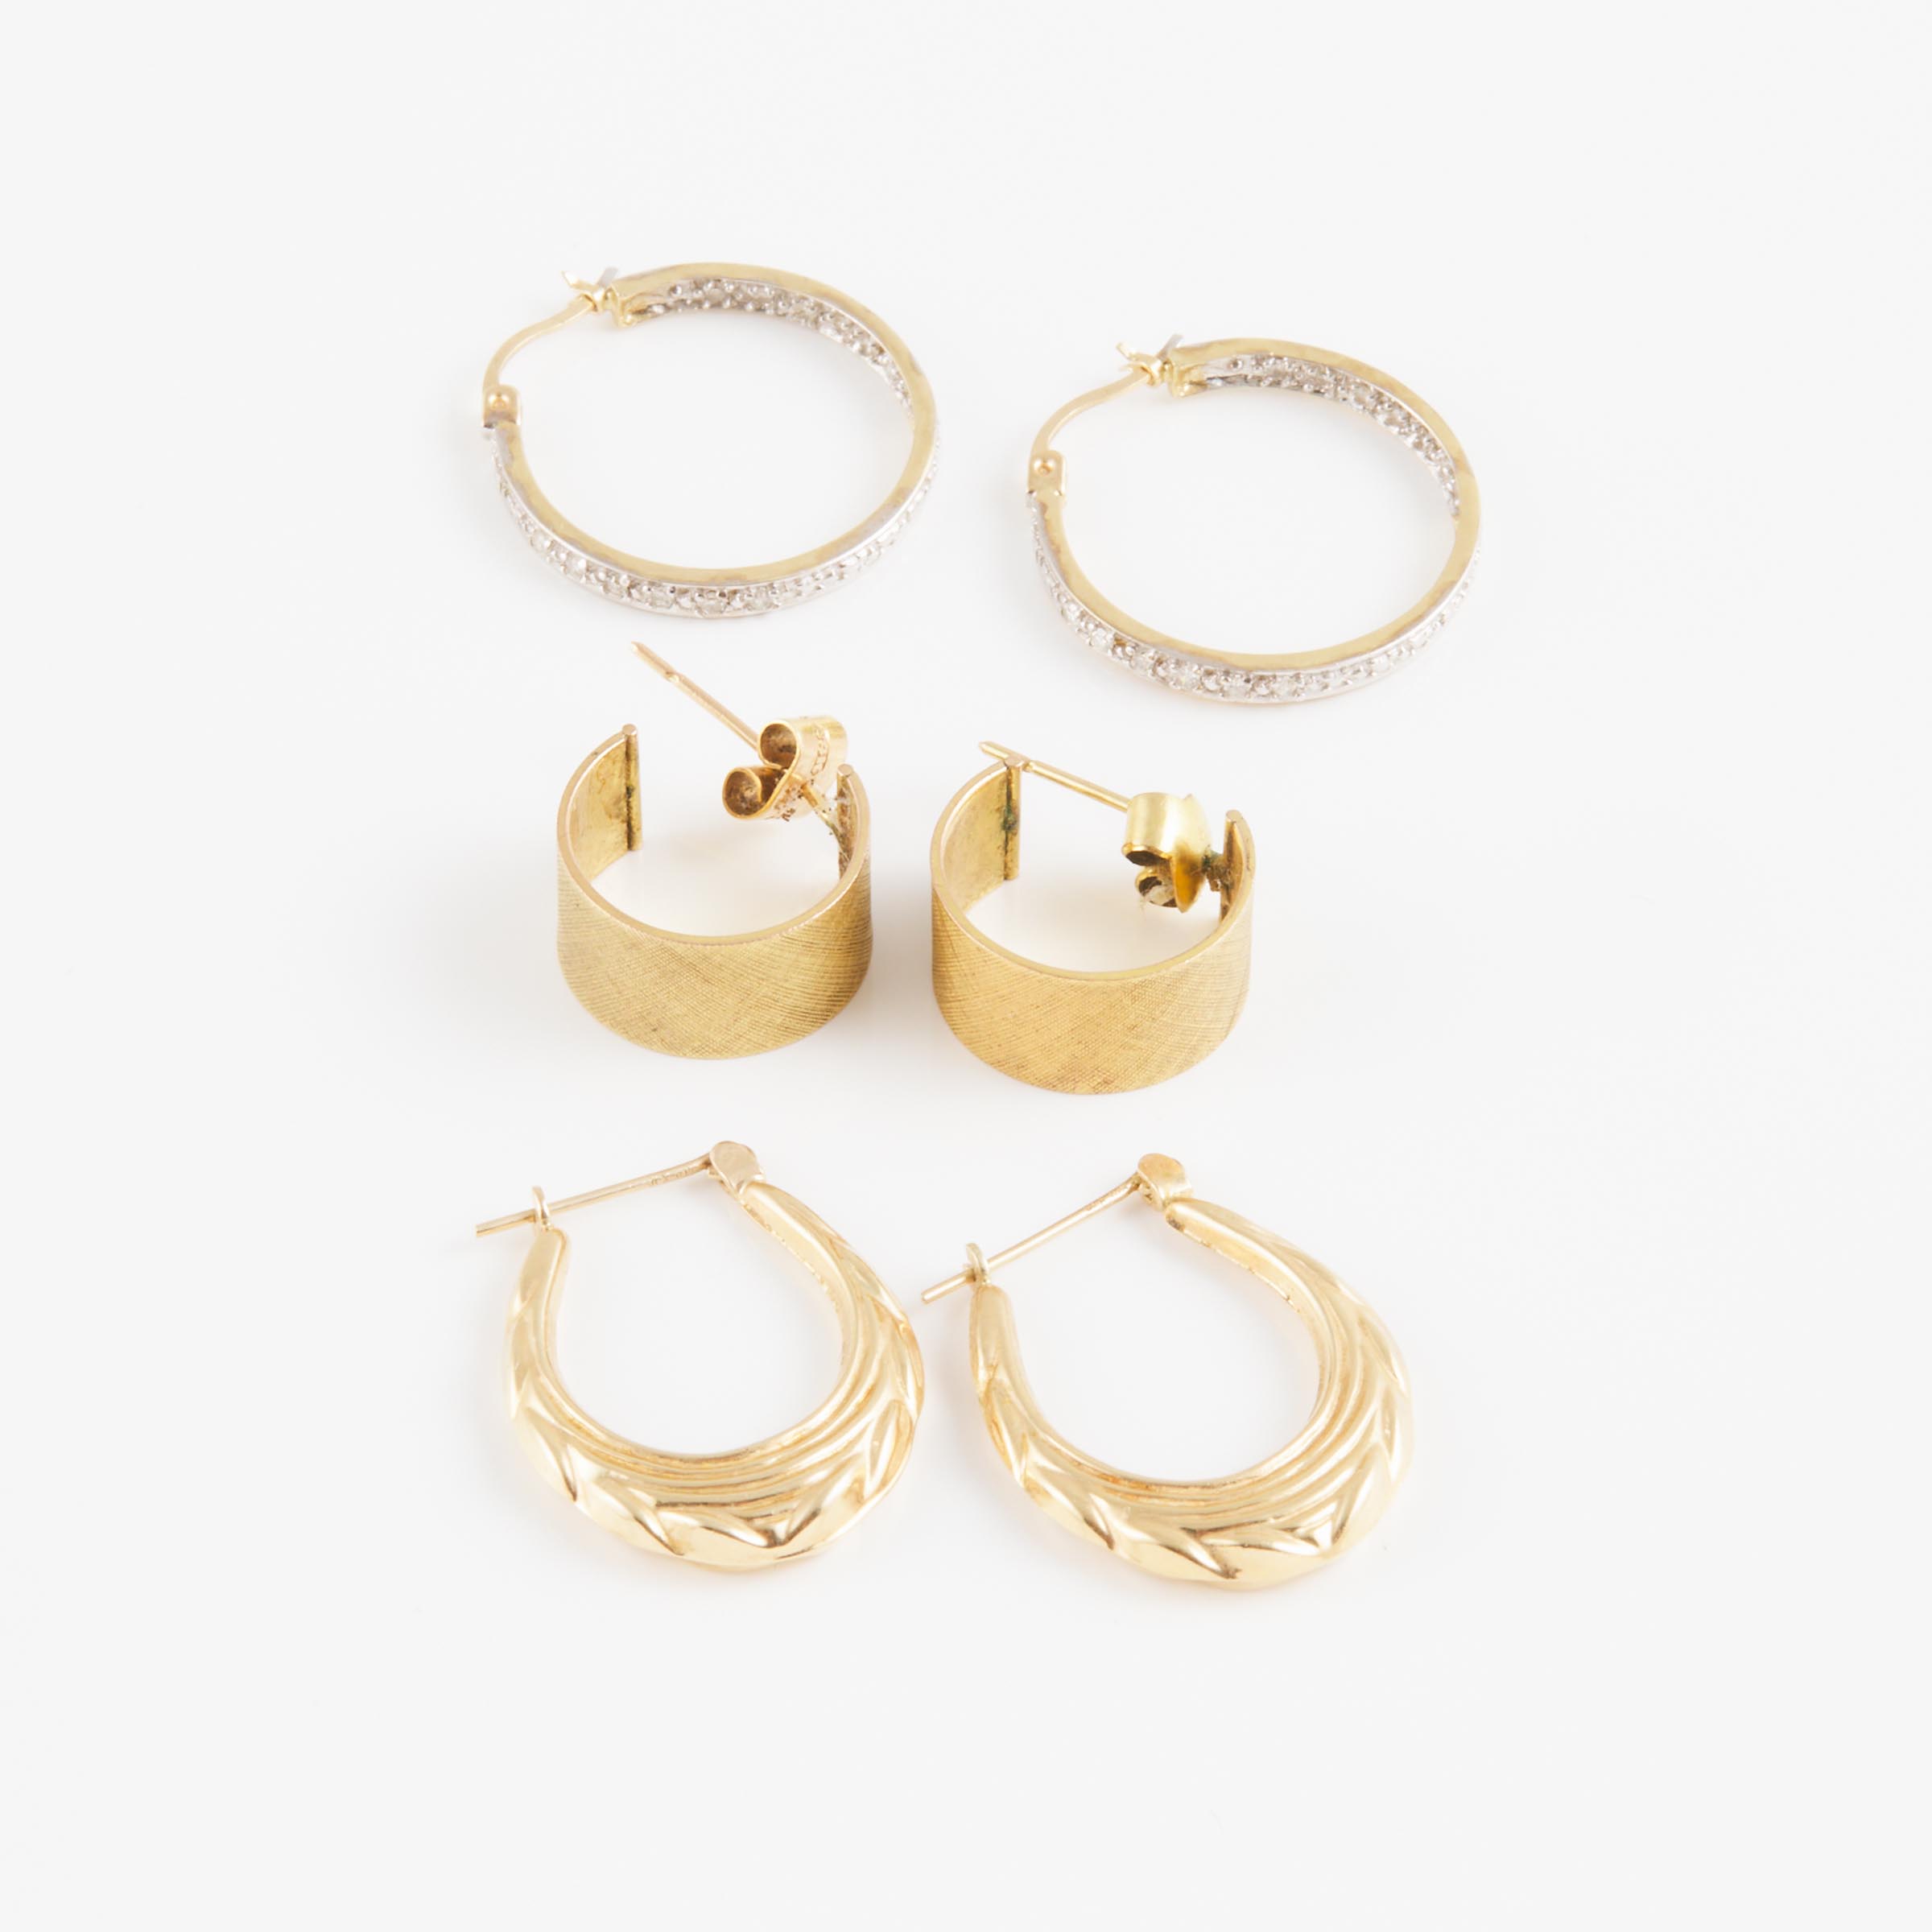 1 x 14k And 2 x 10k Yellow Gold Pairs Of Hoop Earrings